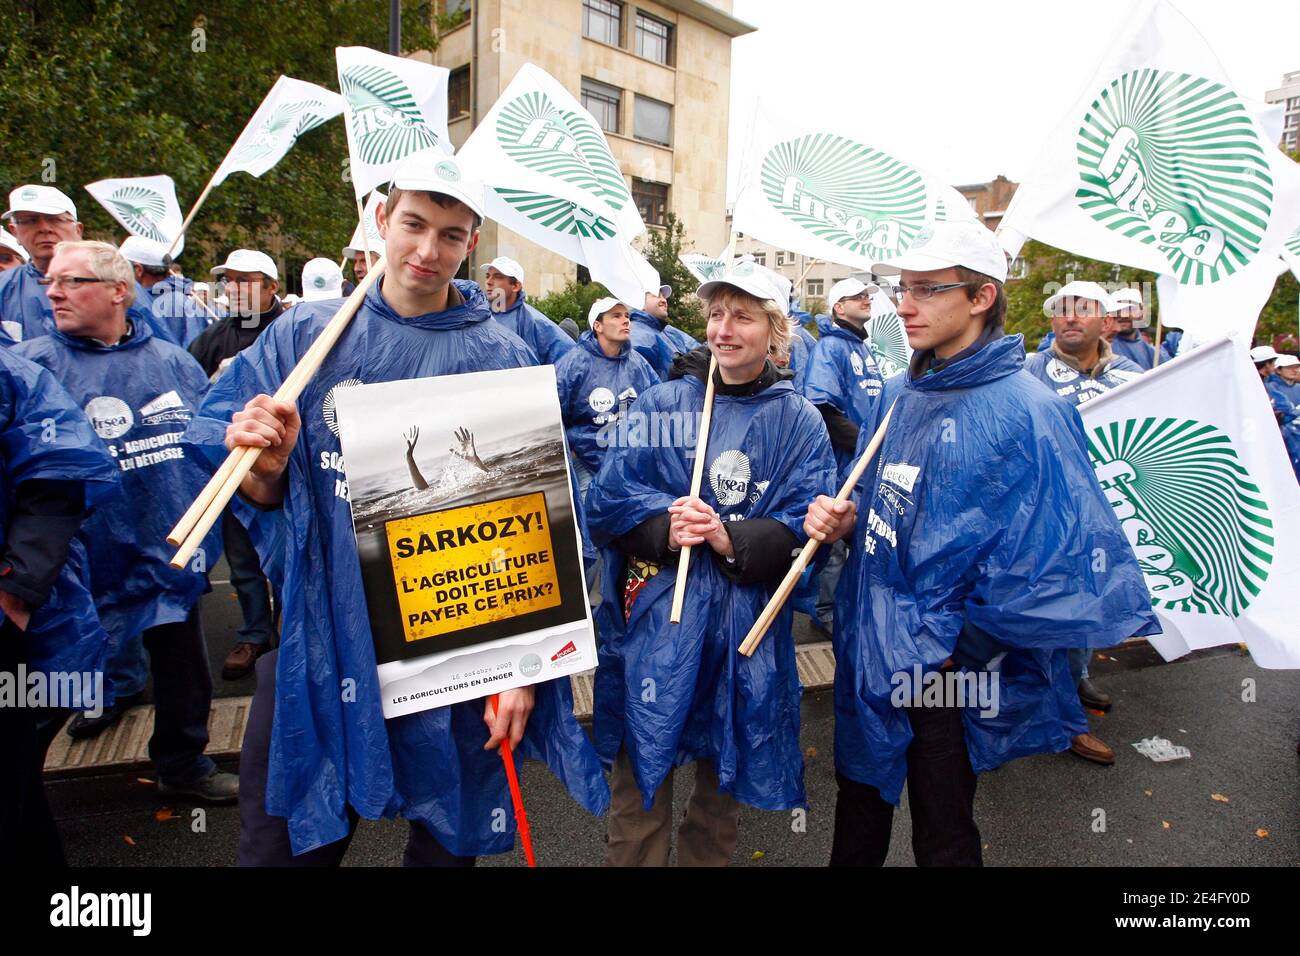 French farmers demonstrate in Lille on October 16, 2009 to protest against their living conditions and the fall in prices of agricultural products. Farmers are holding a national day of protest in several French cities appealed by the National Federation Stock Photo